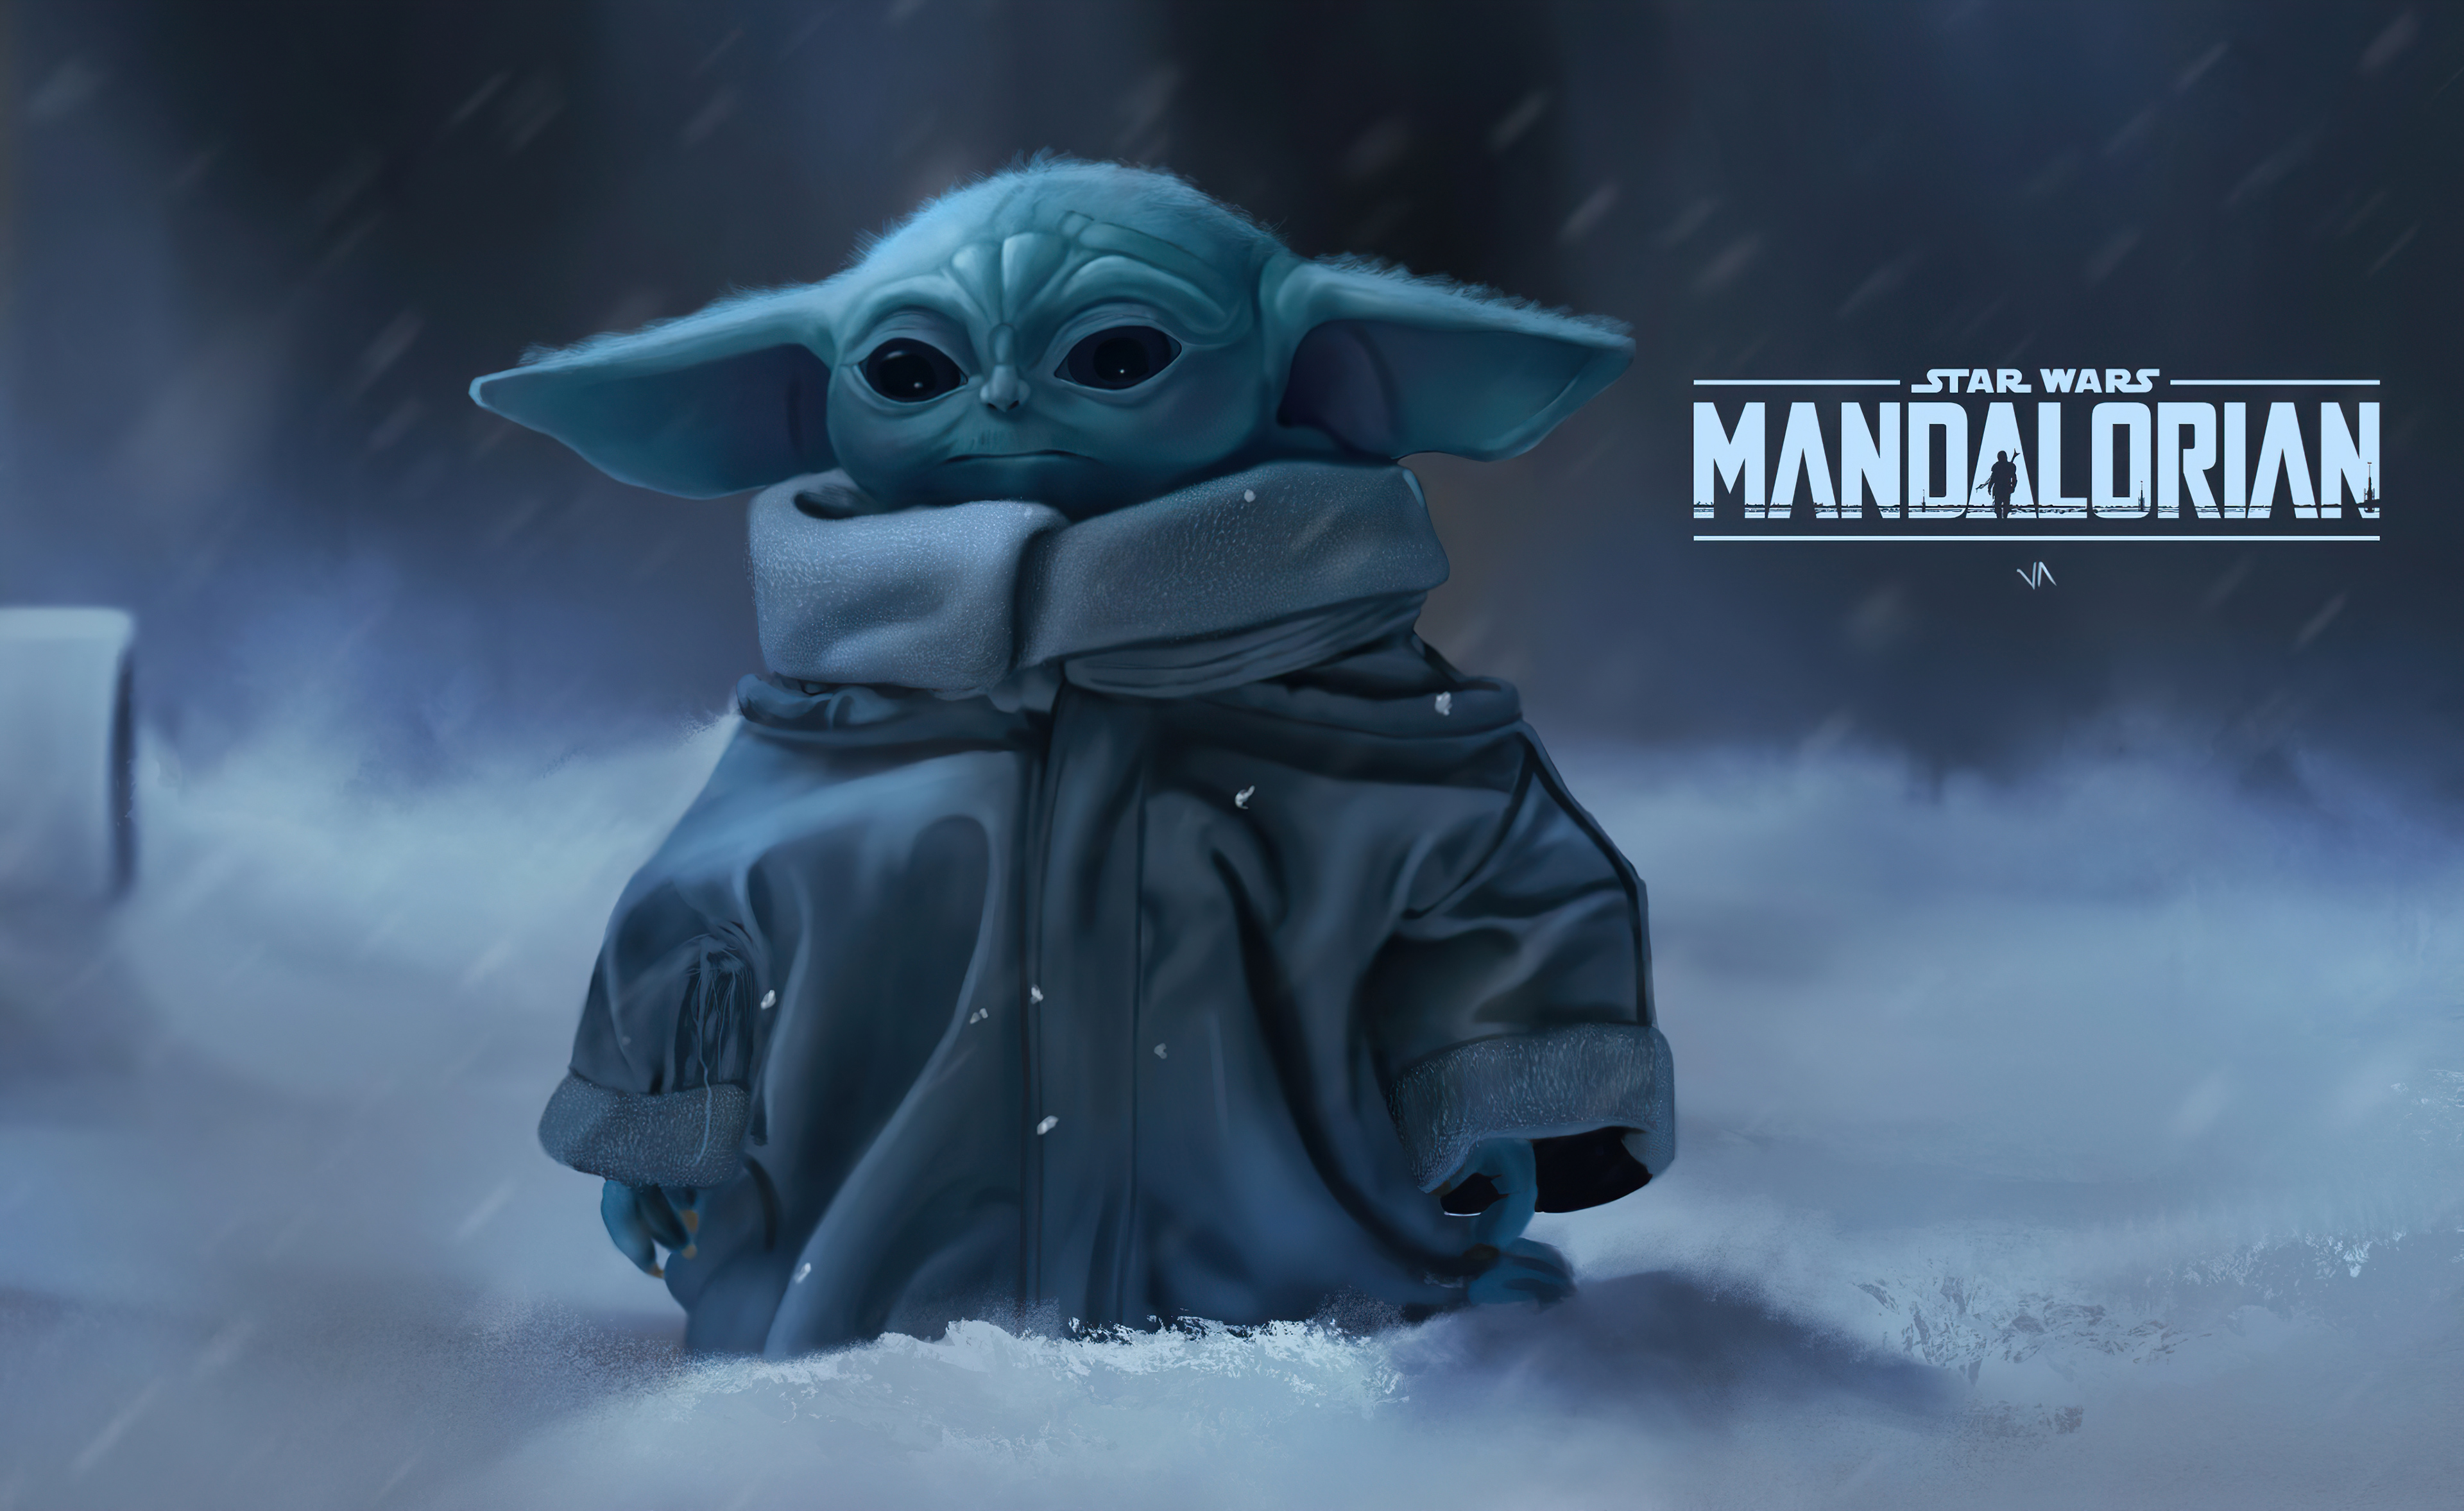 Baby Yoda With a Warm Jacket in Snow by Visualsofazmat1